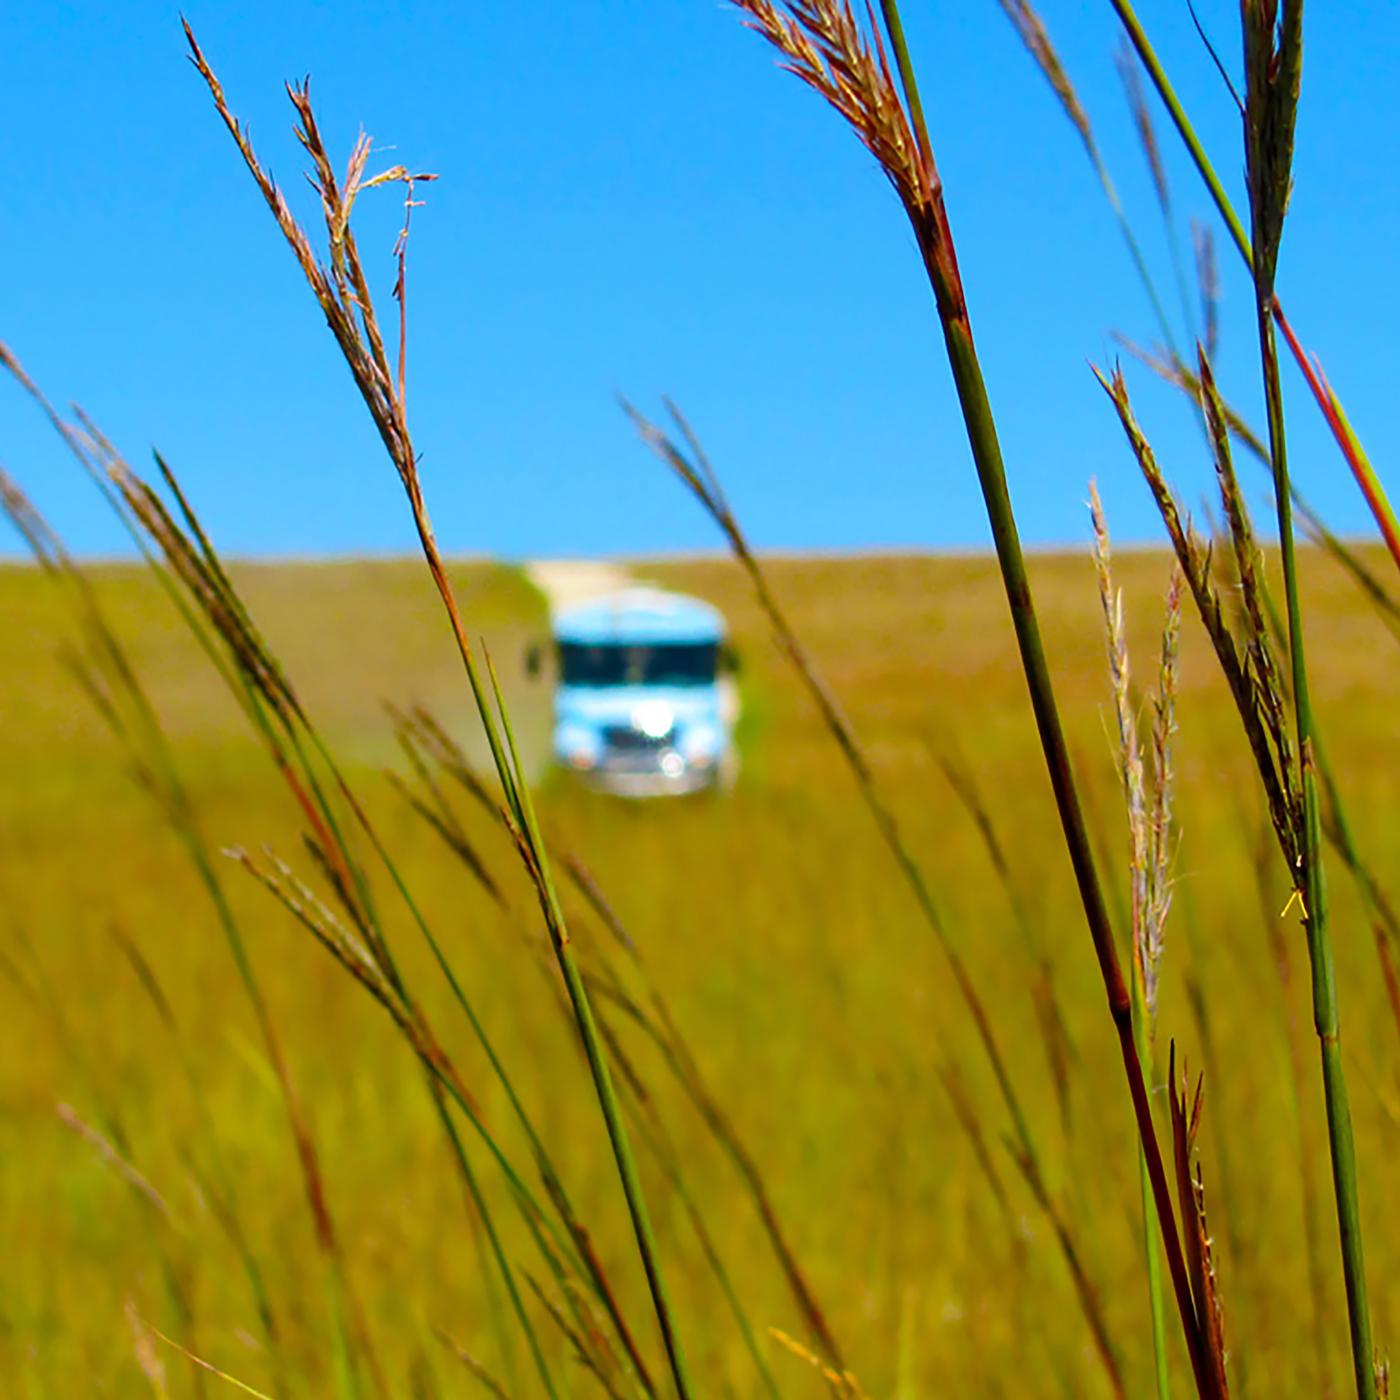 Blue bus with tallgrass in foreground